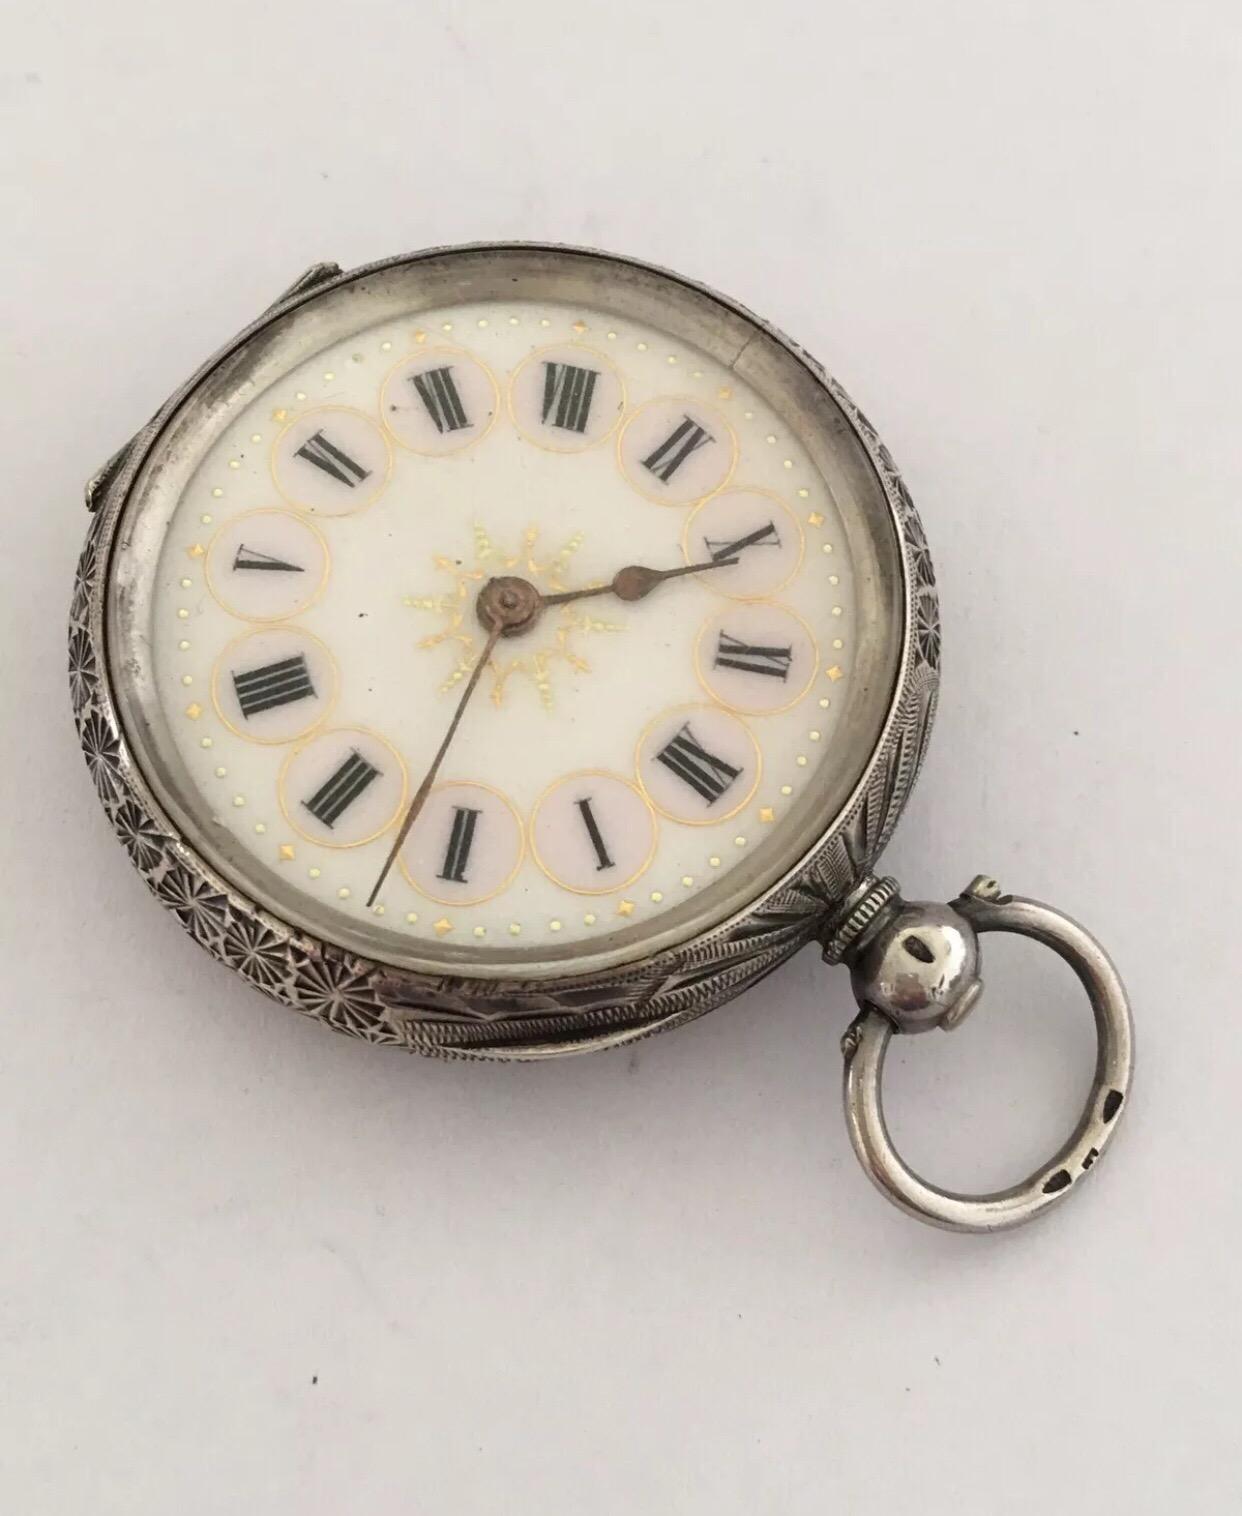 Antique Silver with Pink Enamel and Gold Inlaid Dial Key Wind Pocket Watch 6